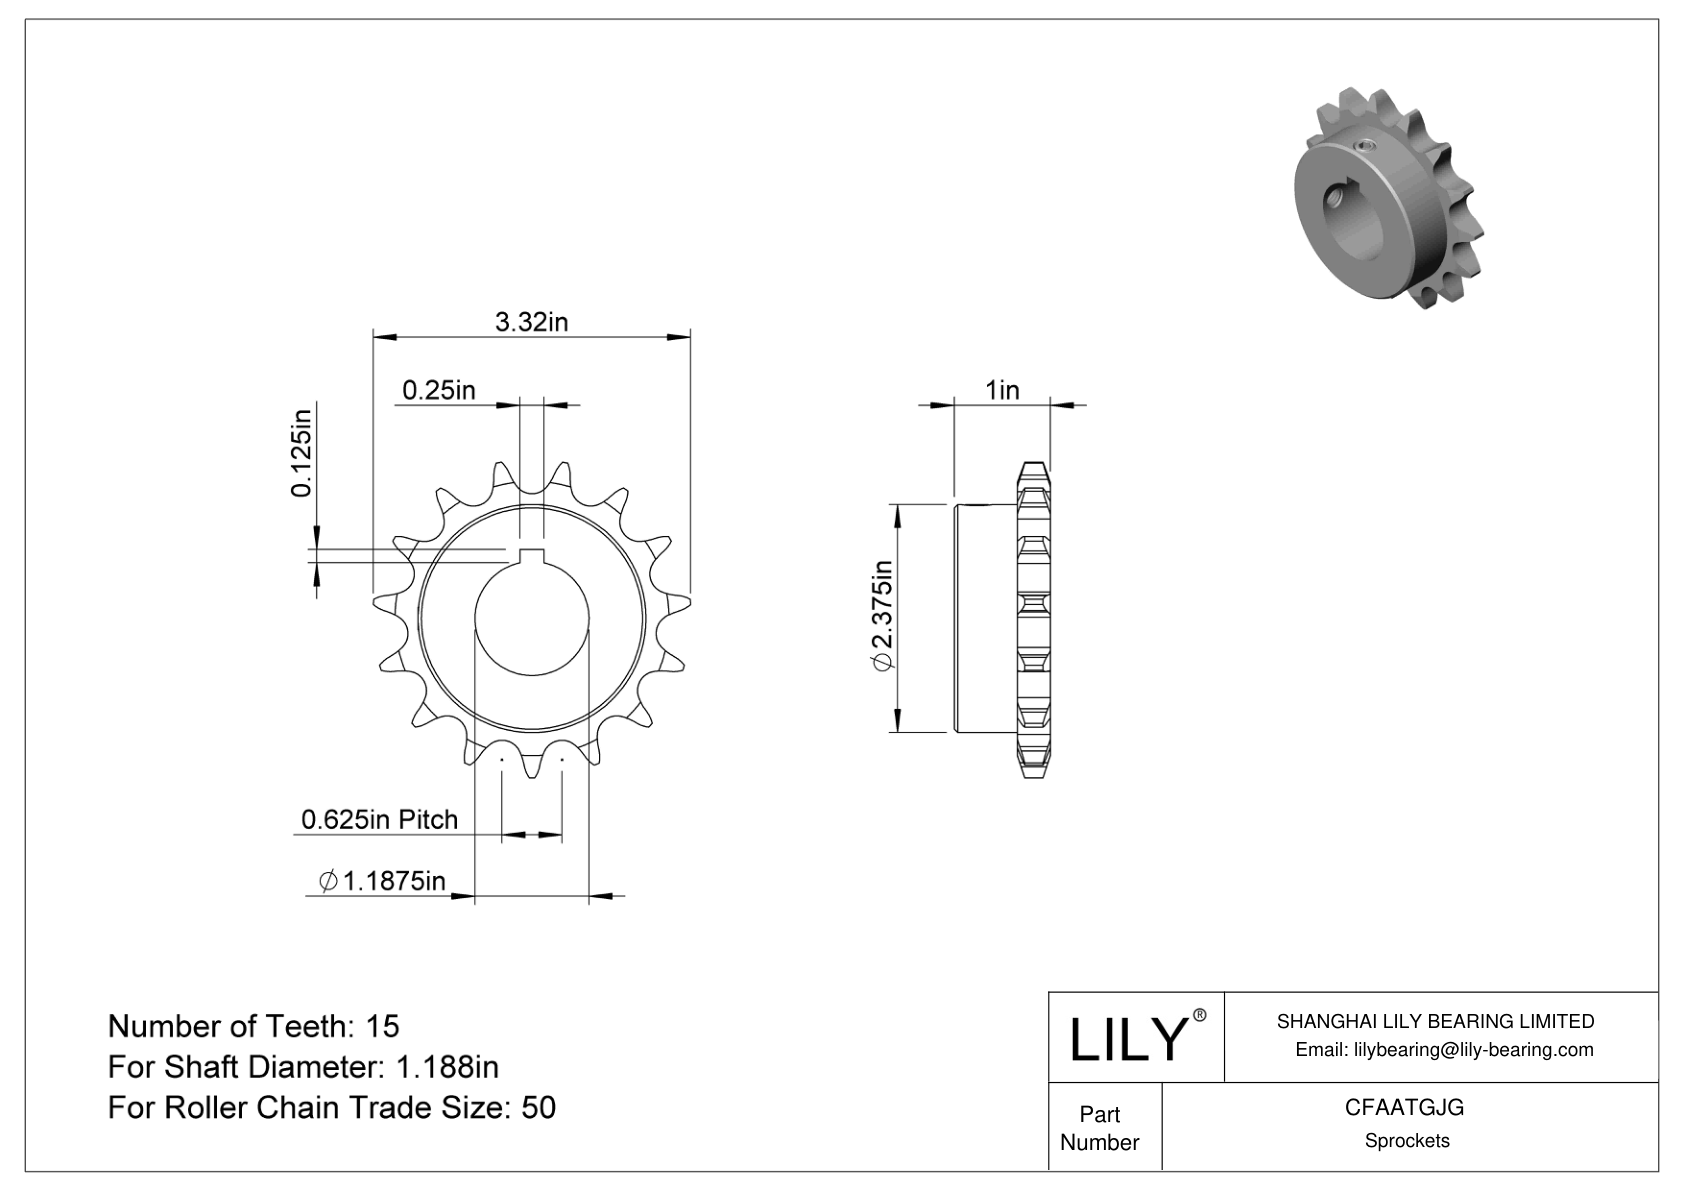 CFAATGJG Wear-Resistant Sprockets for ANSI Roller Chain cad drawing